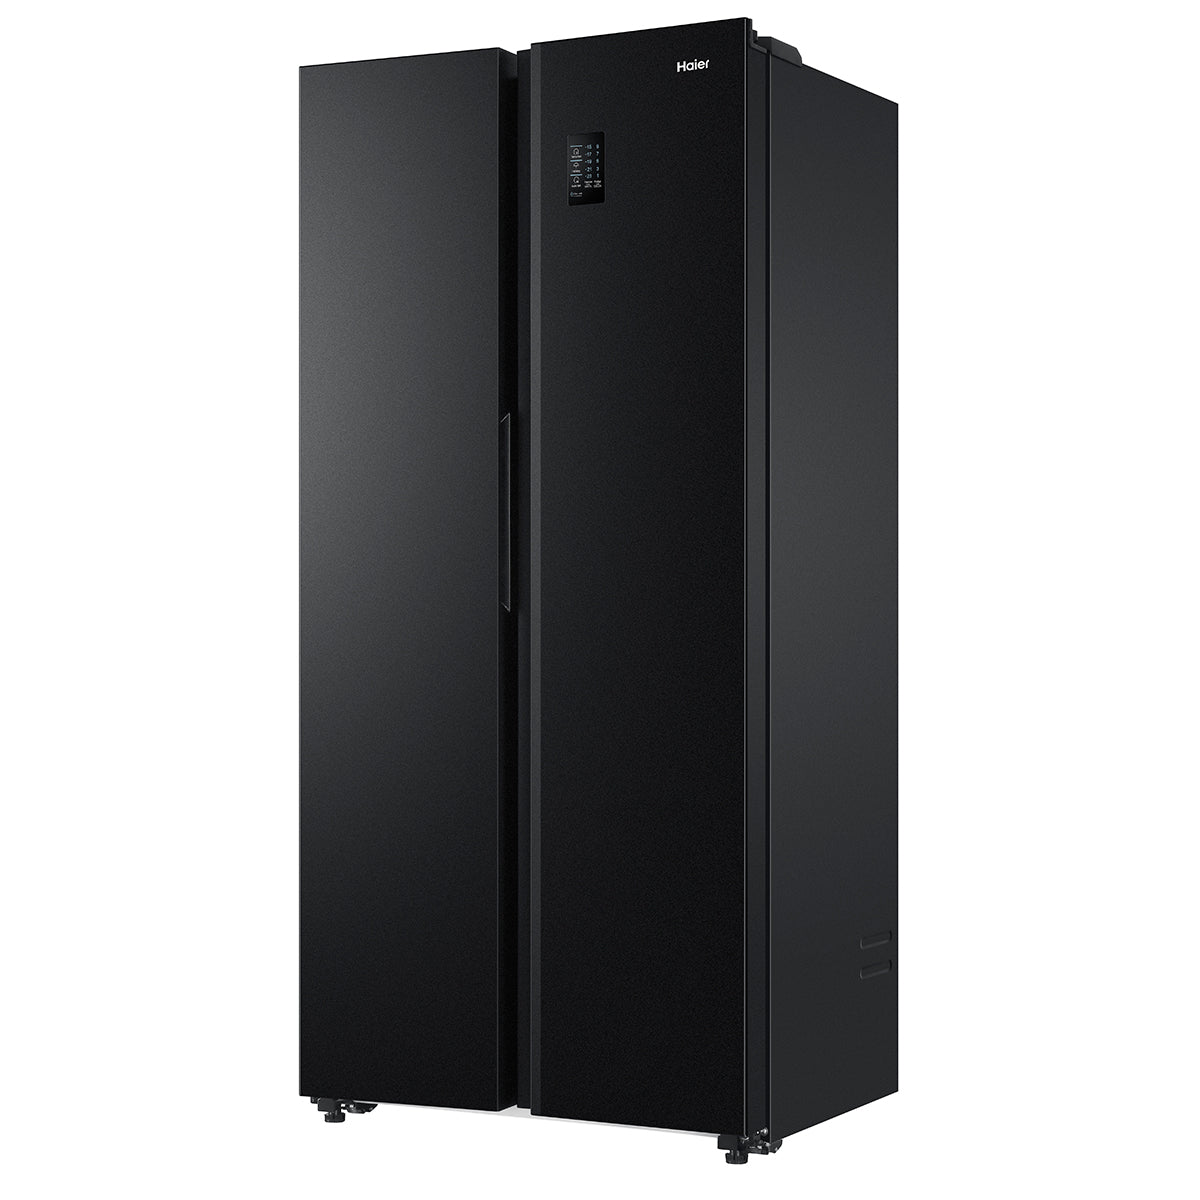 Haier Thermocool HRF-522IBS 480 Litres Side By Side Refrigerator Black